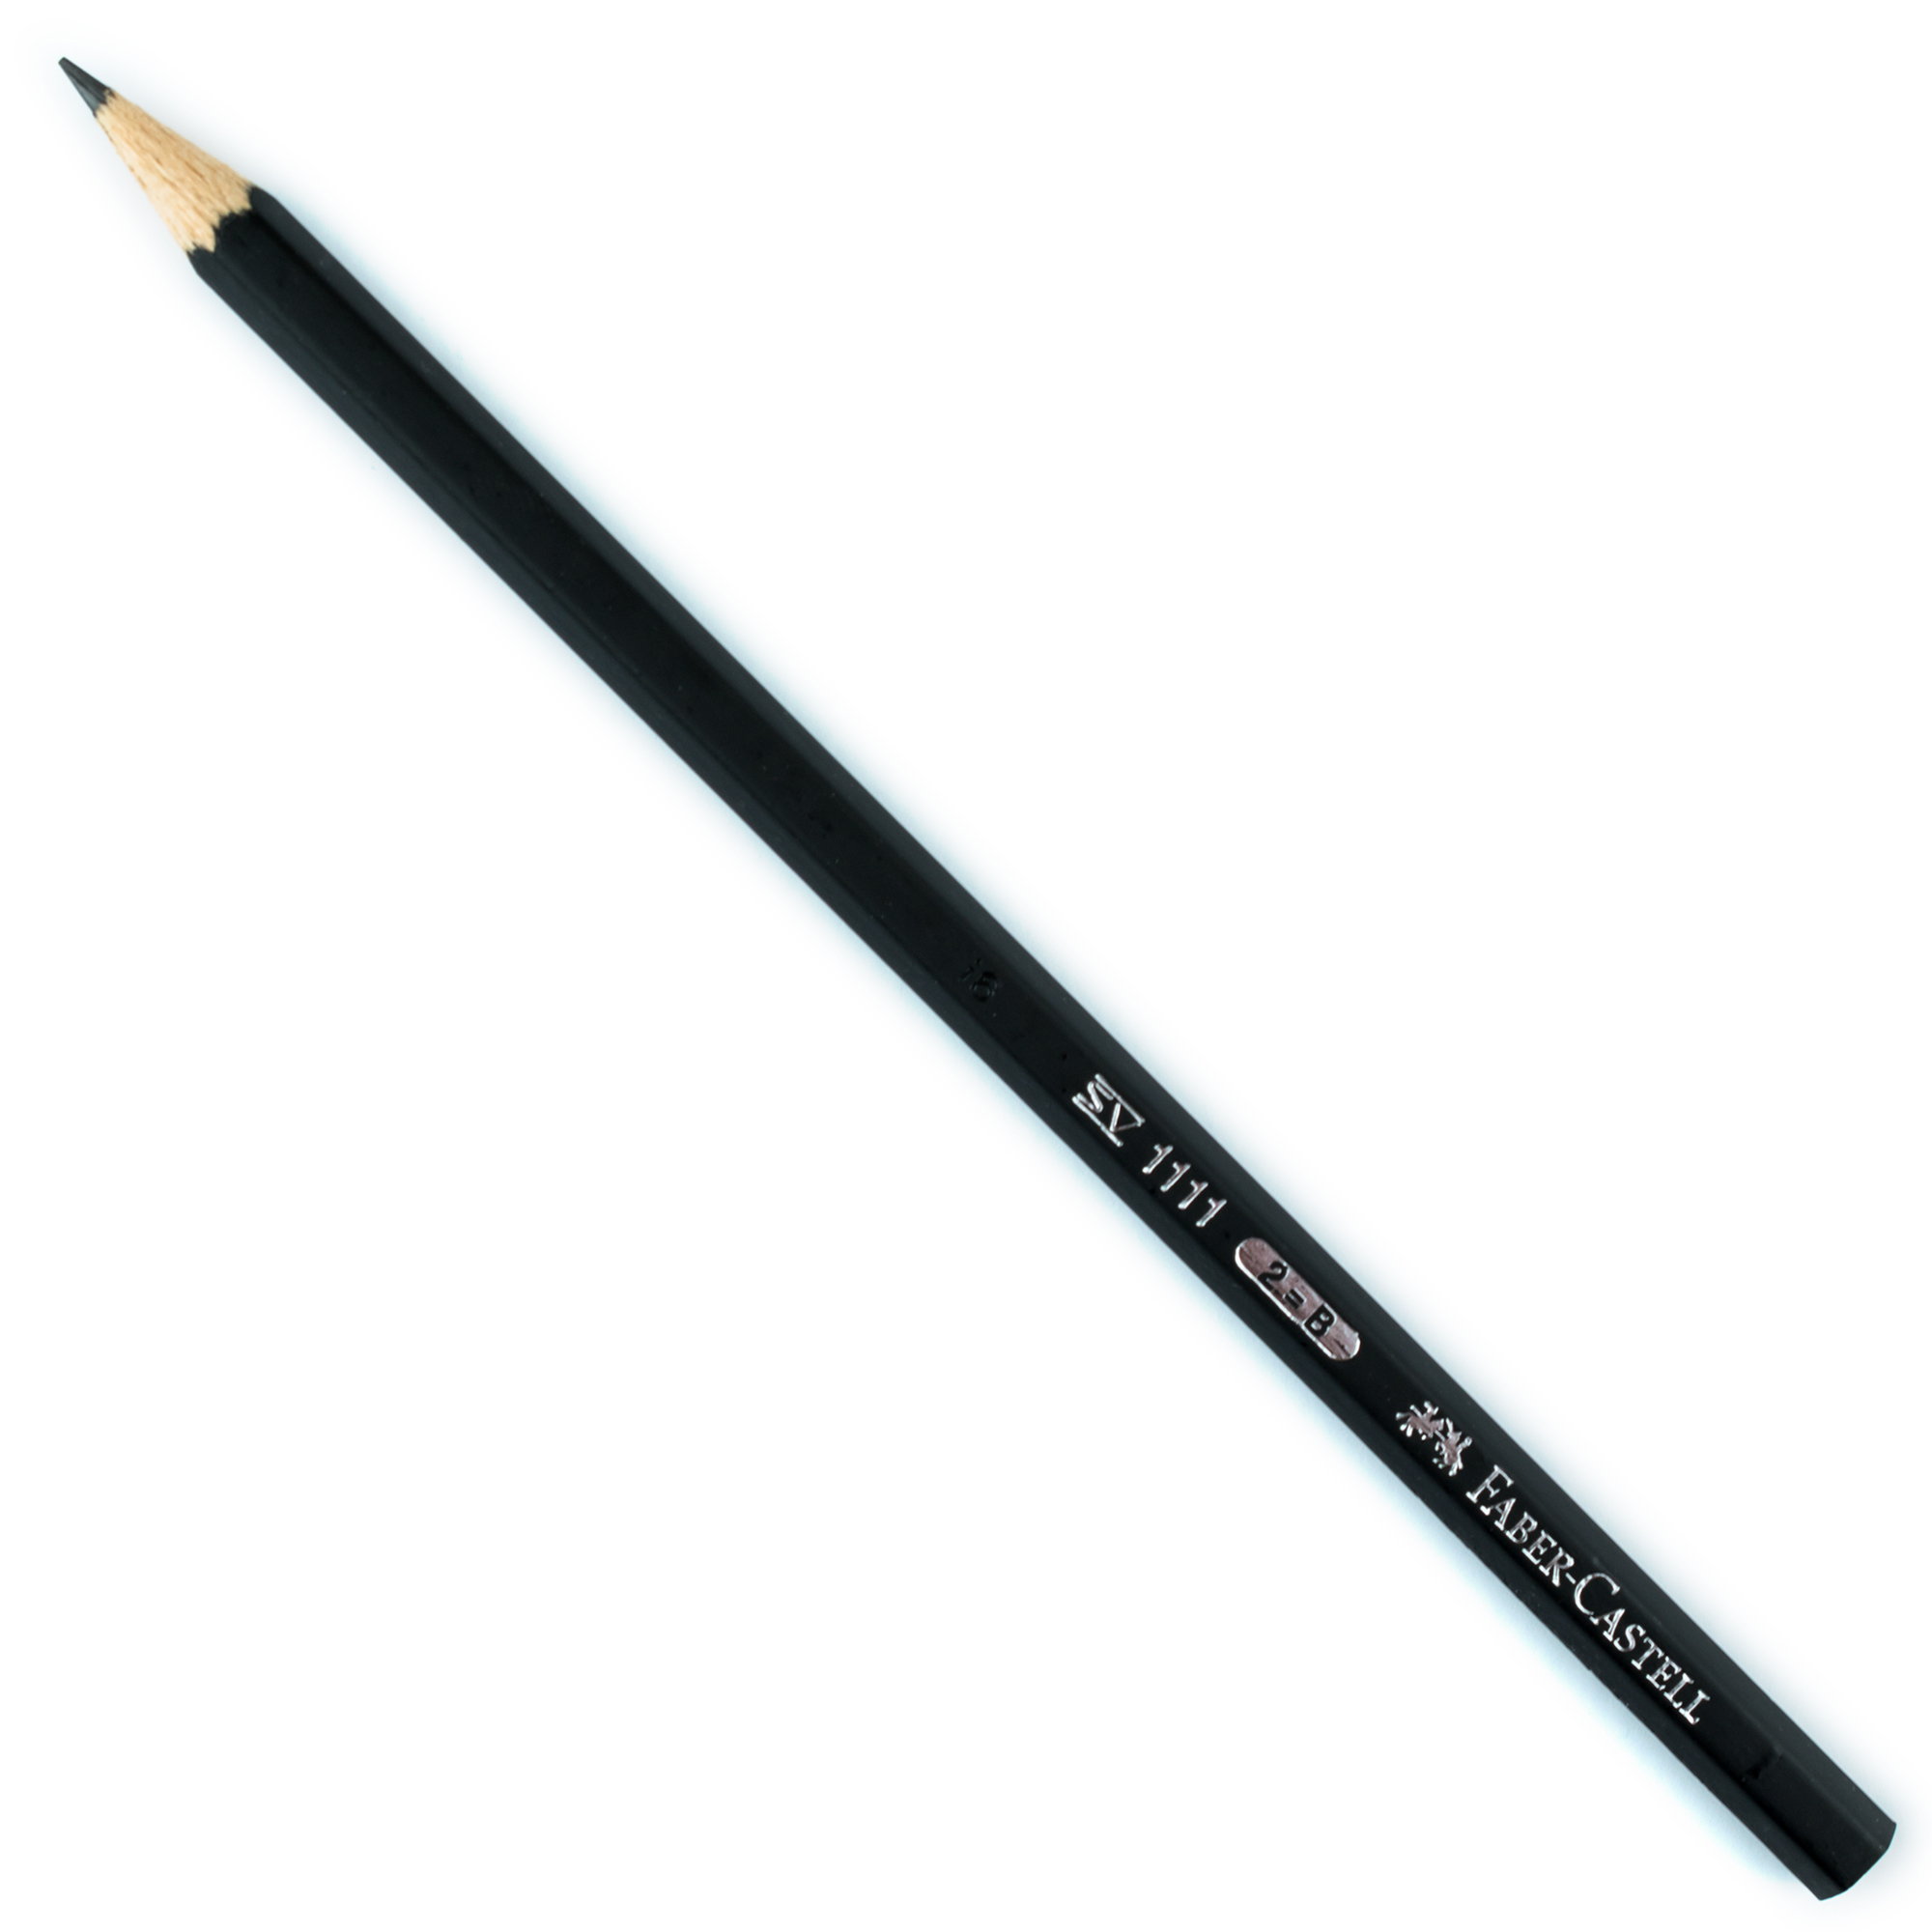 Faber-Castell 1111 B 12 pencils pack – Scribe Market